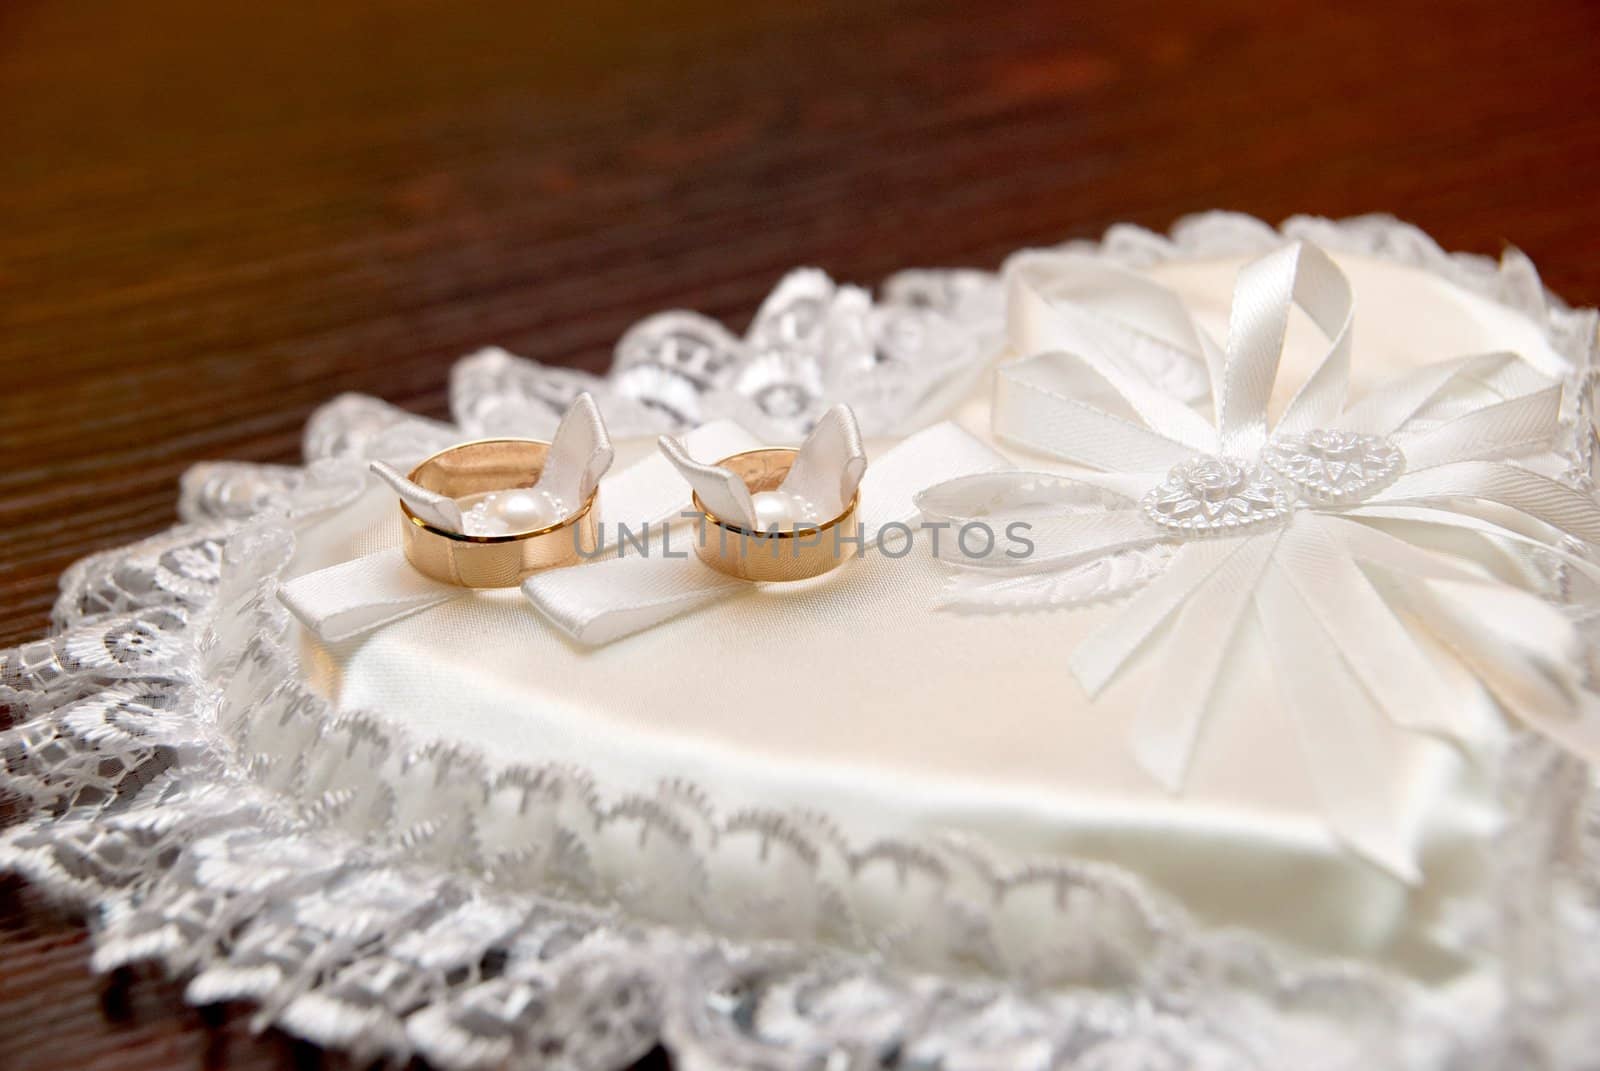 Two wedding rings on a heart-shaped pad